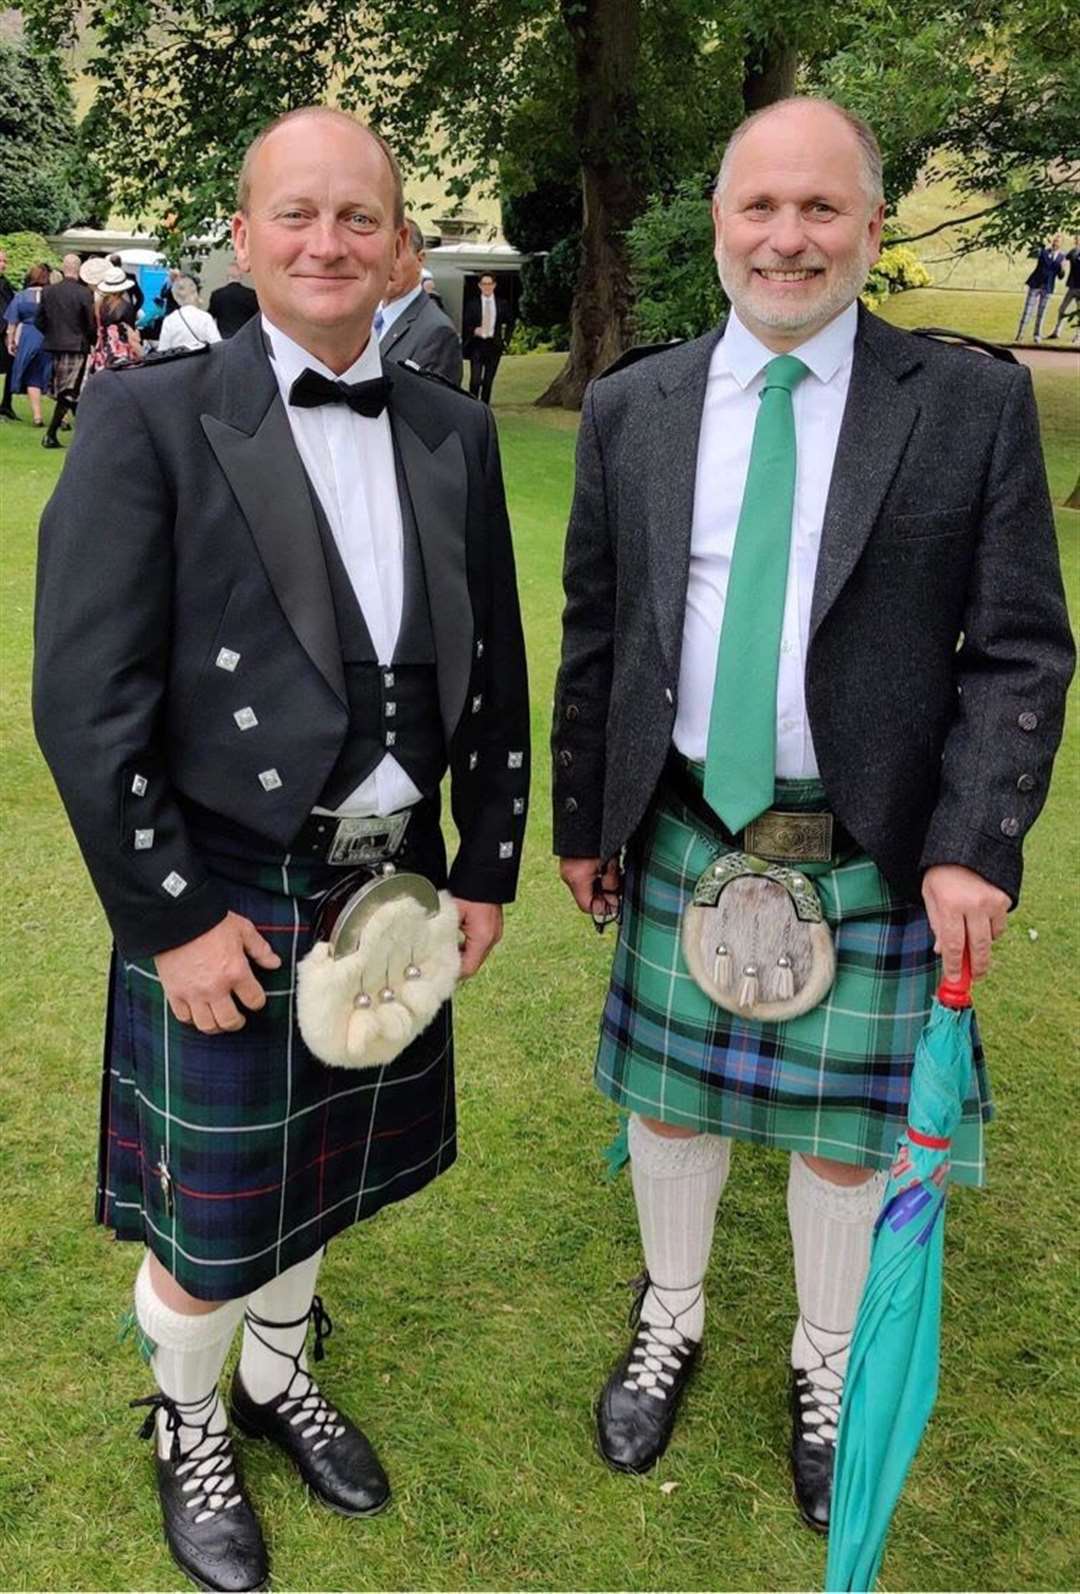 Simon Paterson (left) and Attie Macdonald at the garden party last month.